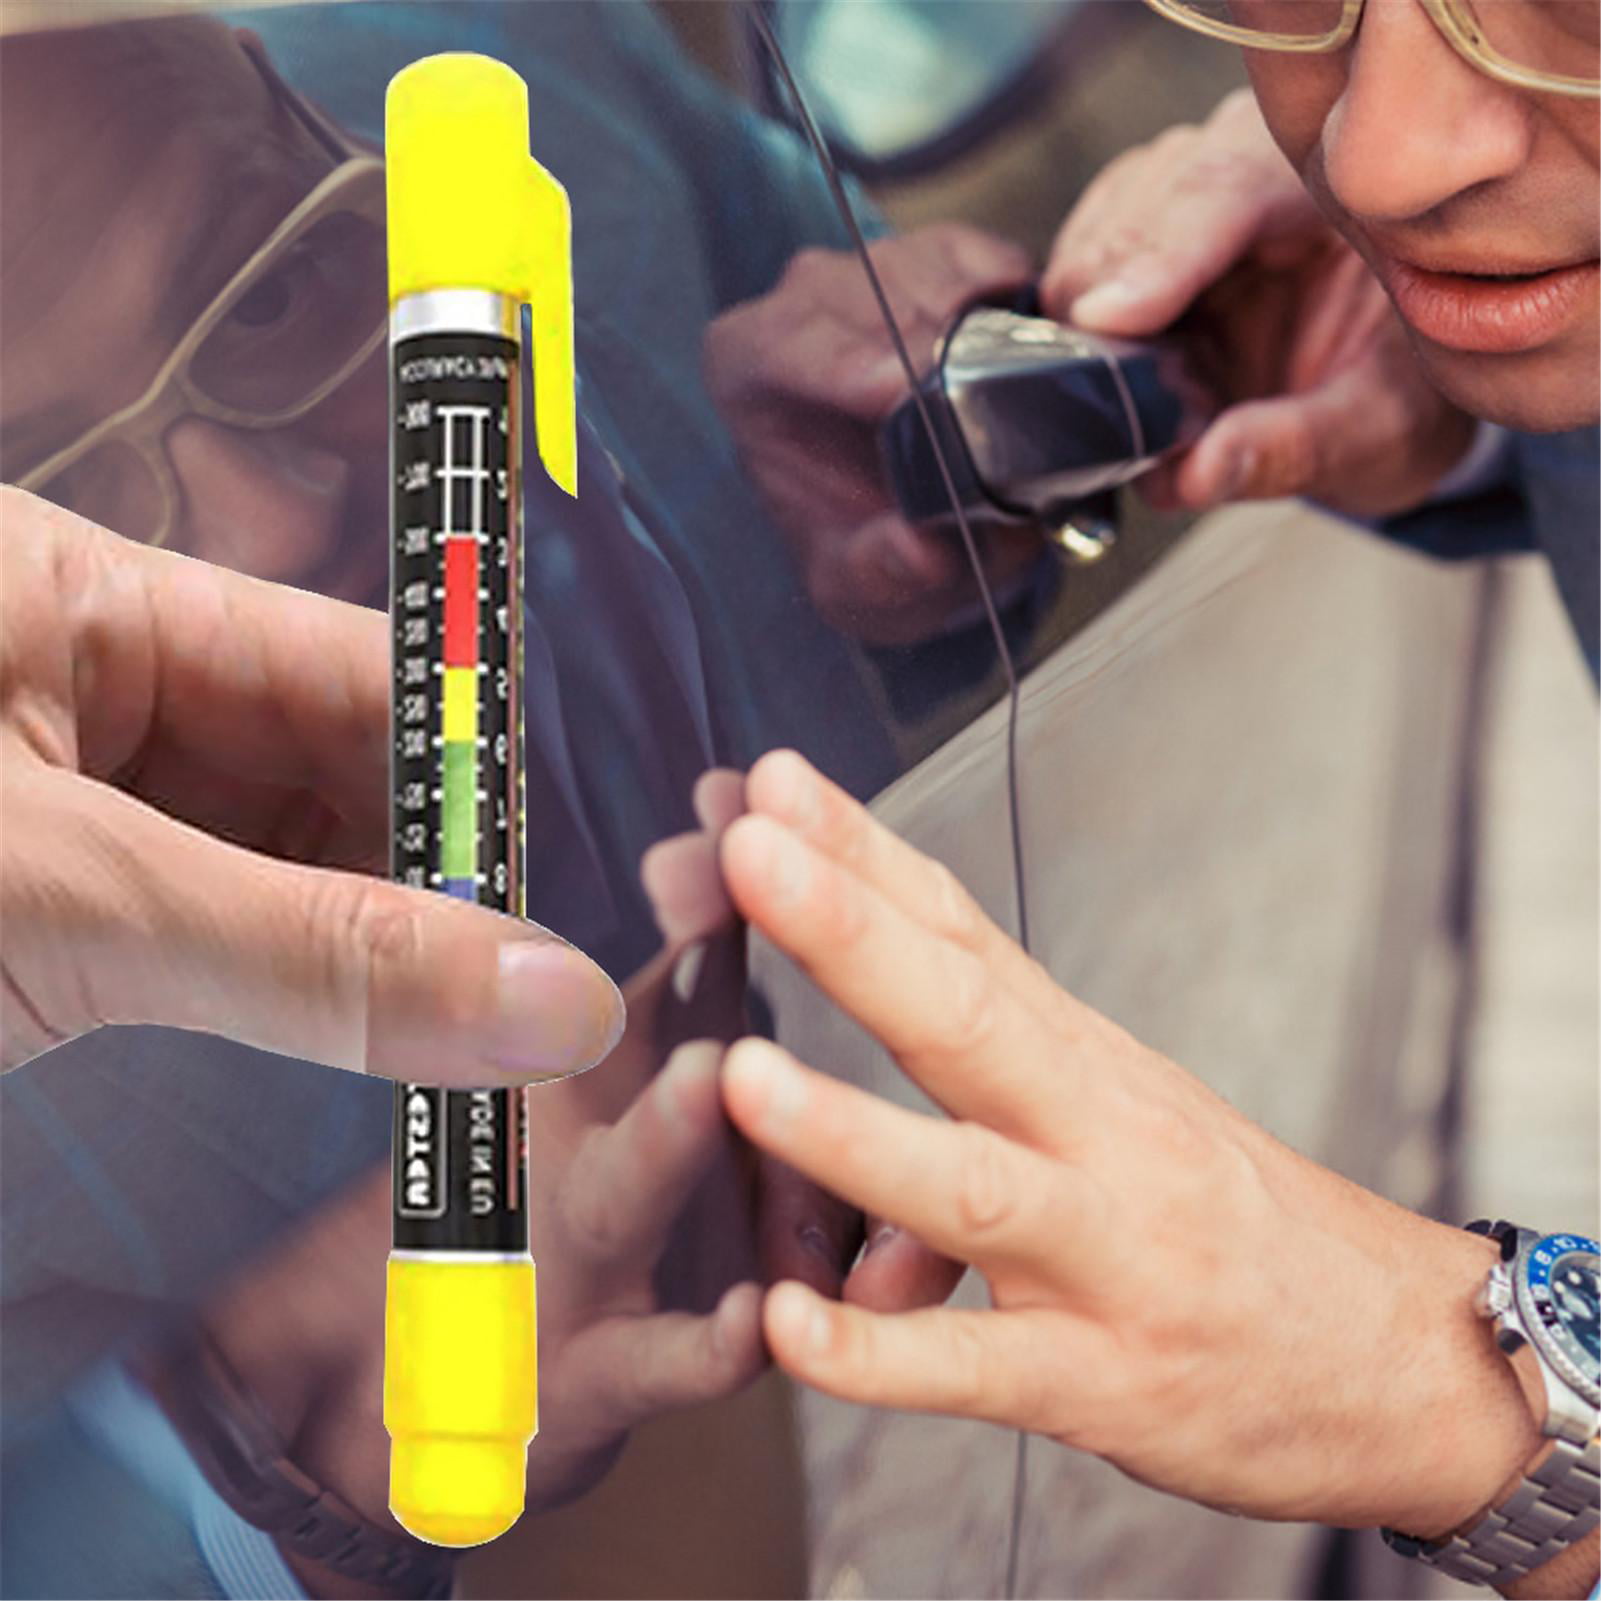 Paint Tester with Magnetic Tip Scale Paint Thickness Tester Auto Paint Test Crash Checking Test Auto Paint Meter Gauge